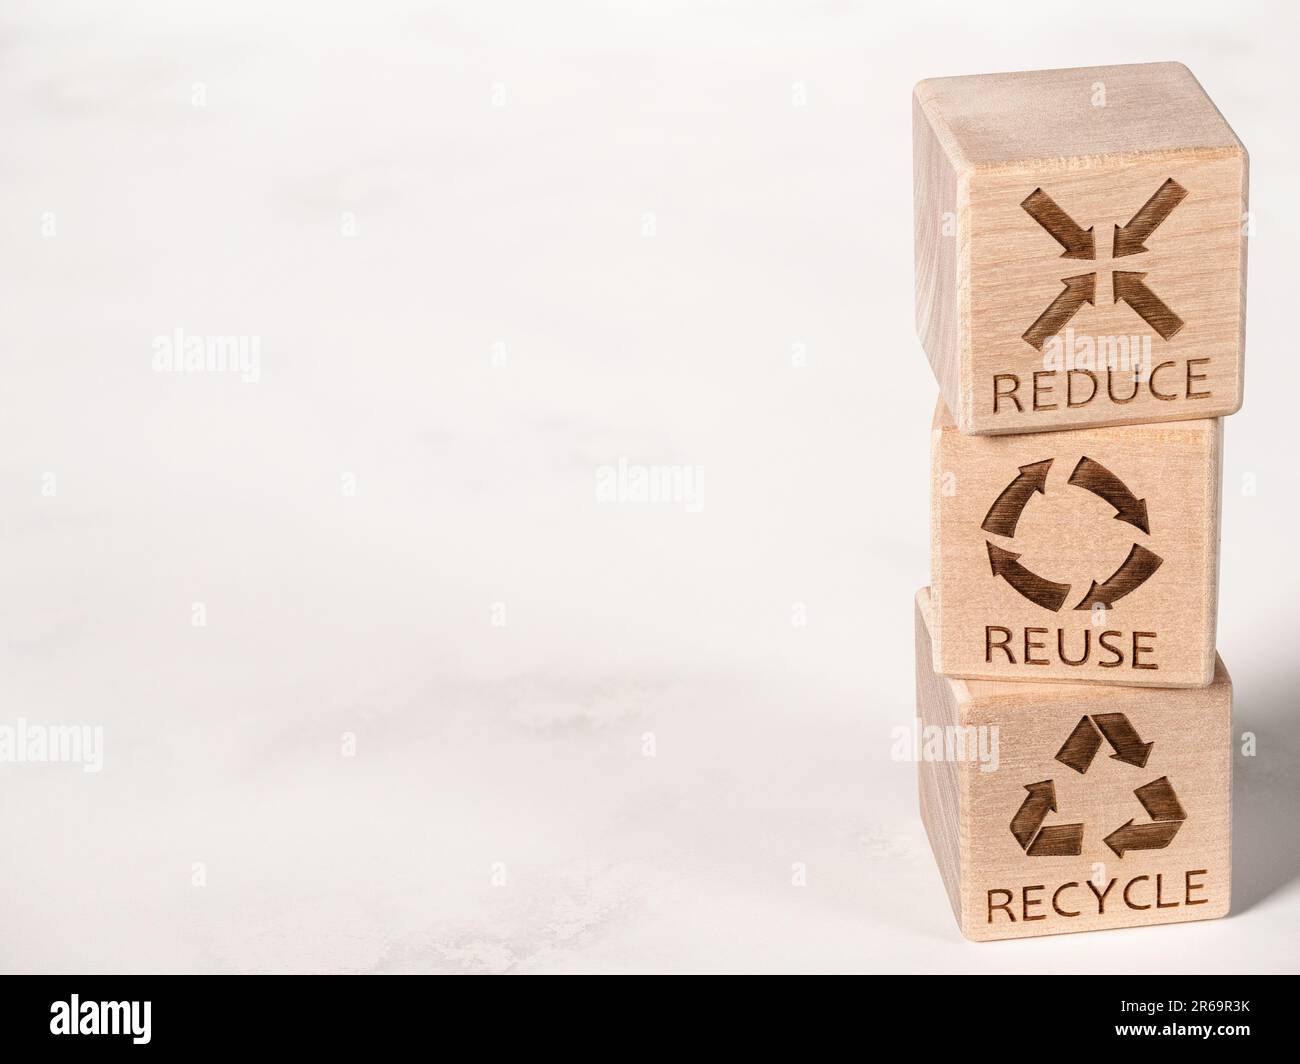 Reduce, Reuse, and Recycle symbols as an environmental conservation concept Stock Photo